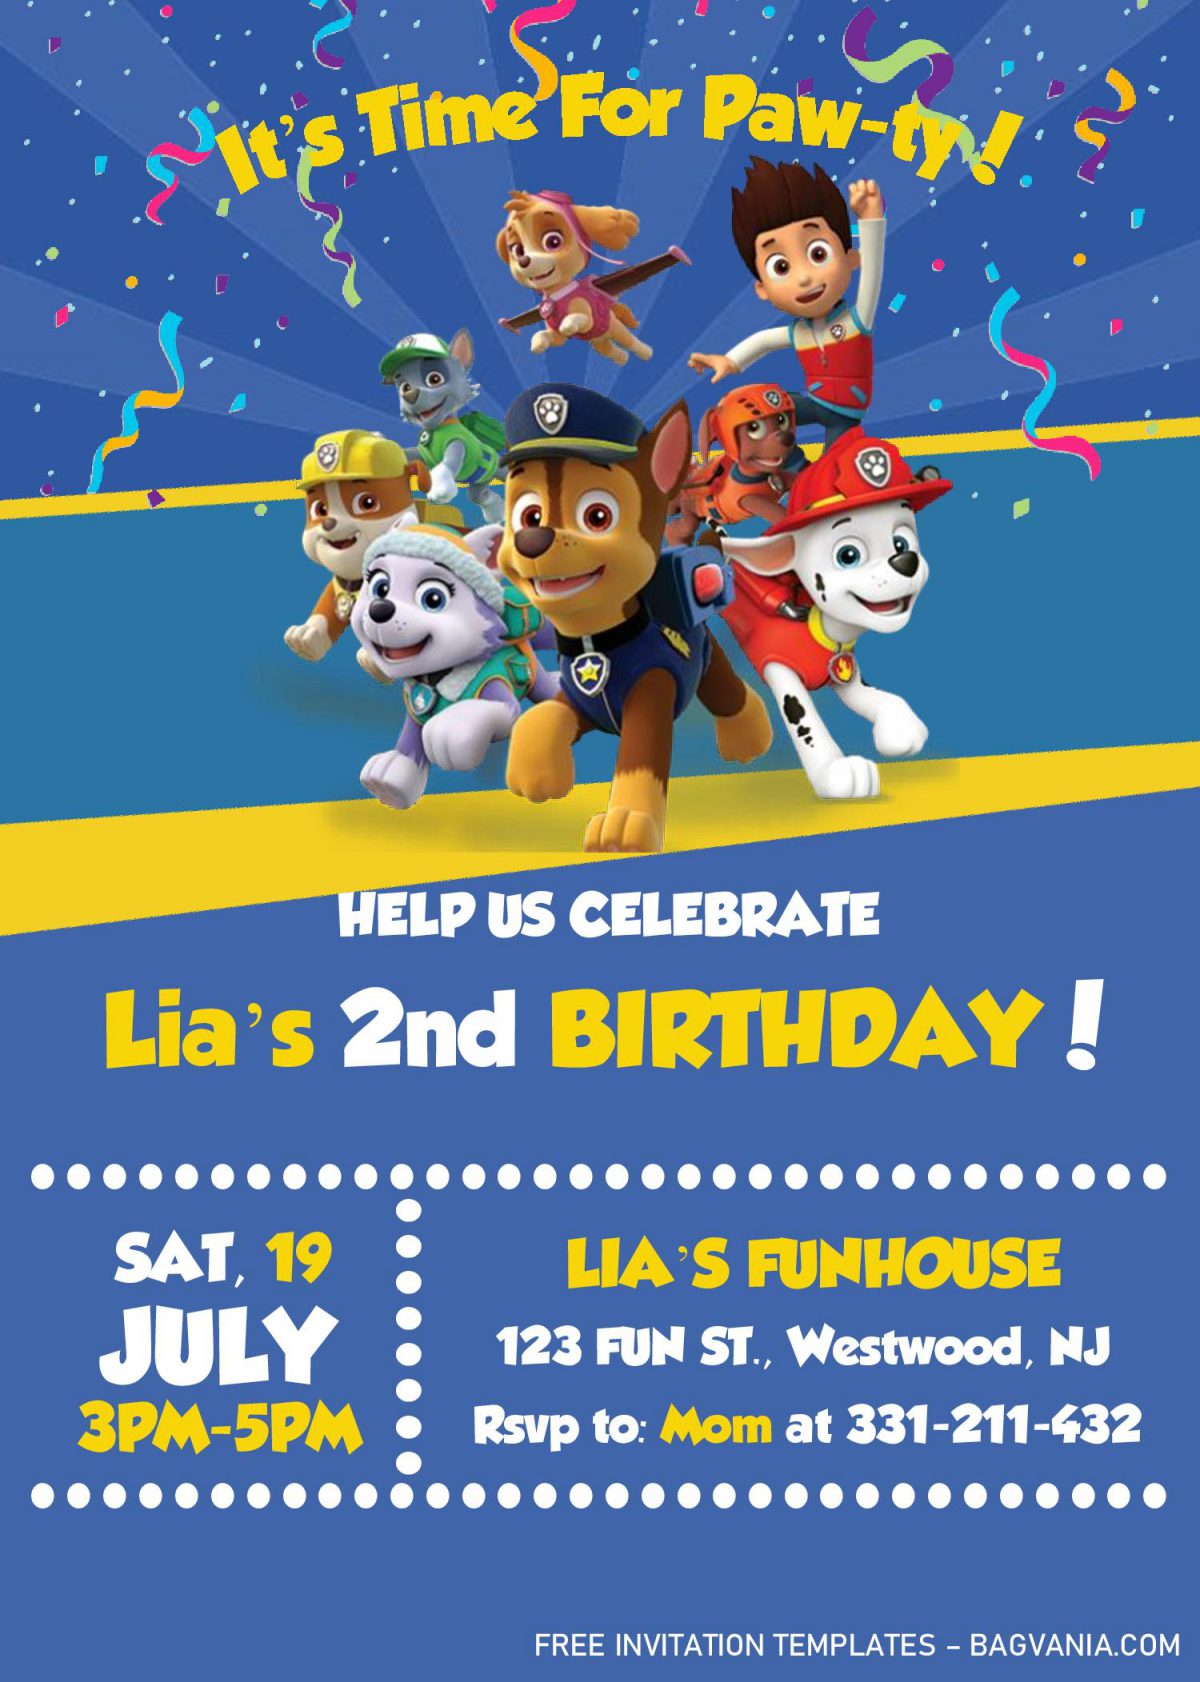 Paw Patrol Invitation Templates - Editable With MS Word and has confetti decorations